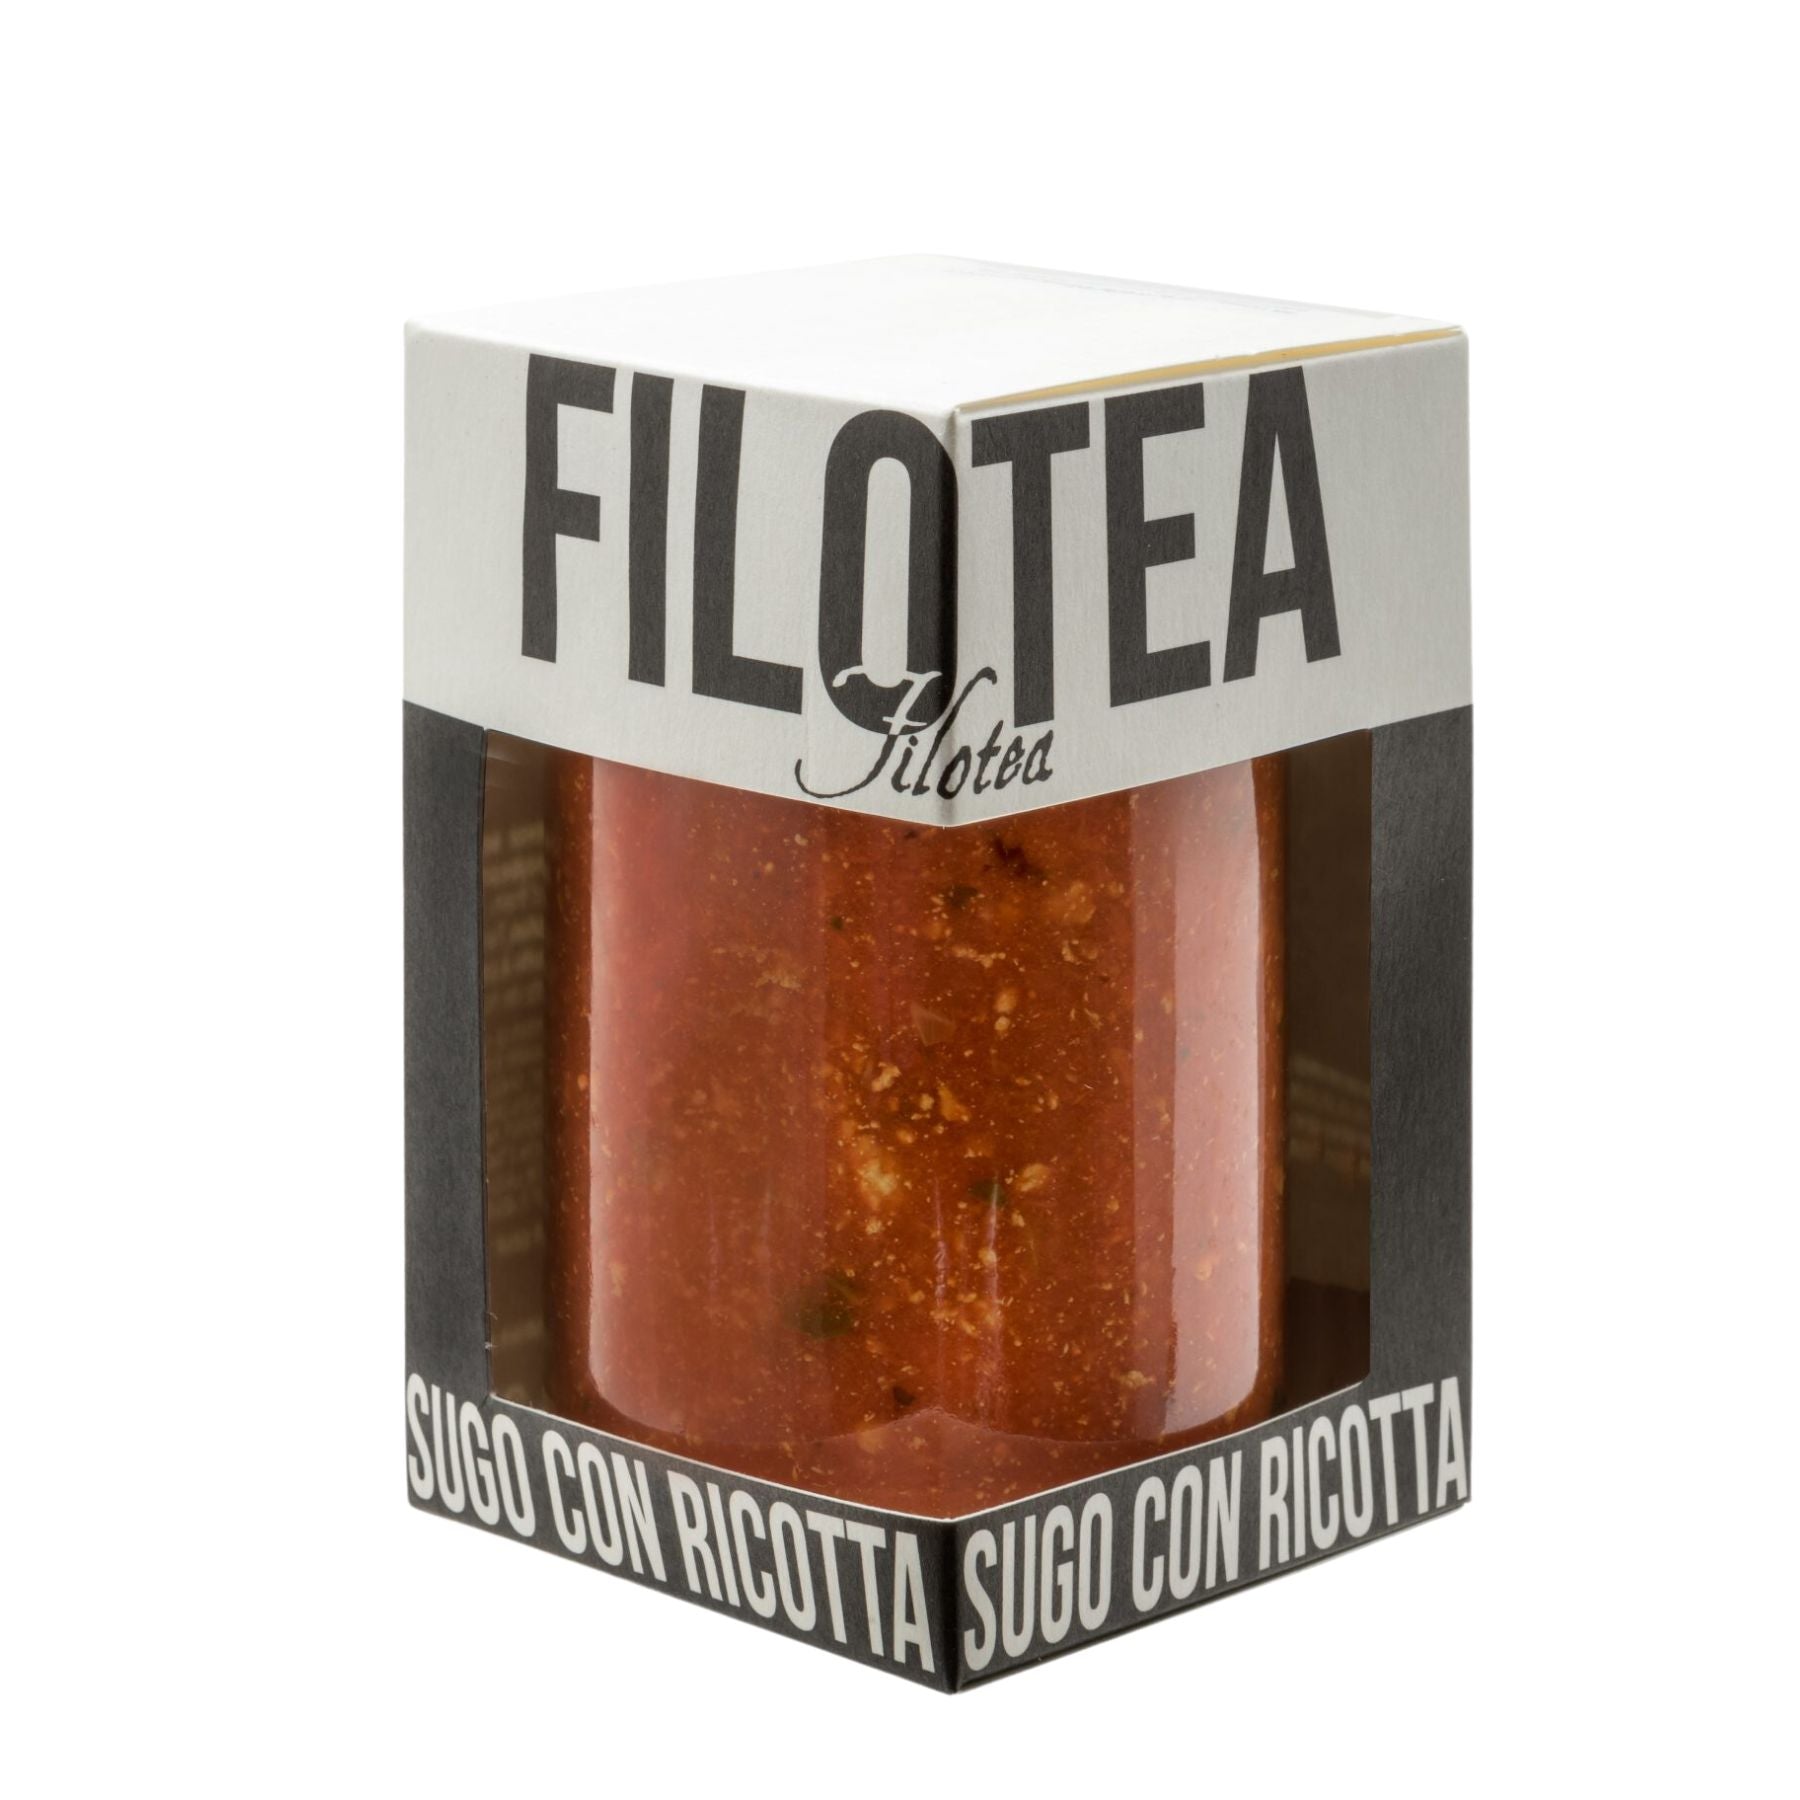 Filotea Ricotta Cheese Pasta Sauce 280g | Imported and distributed in the UK by Just Gourmet Foods